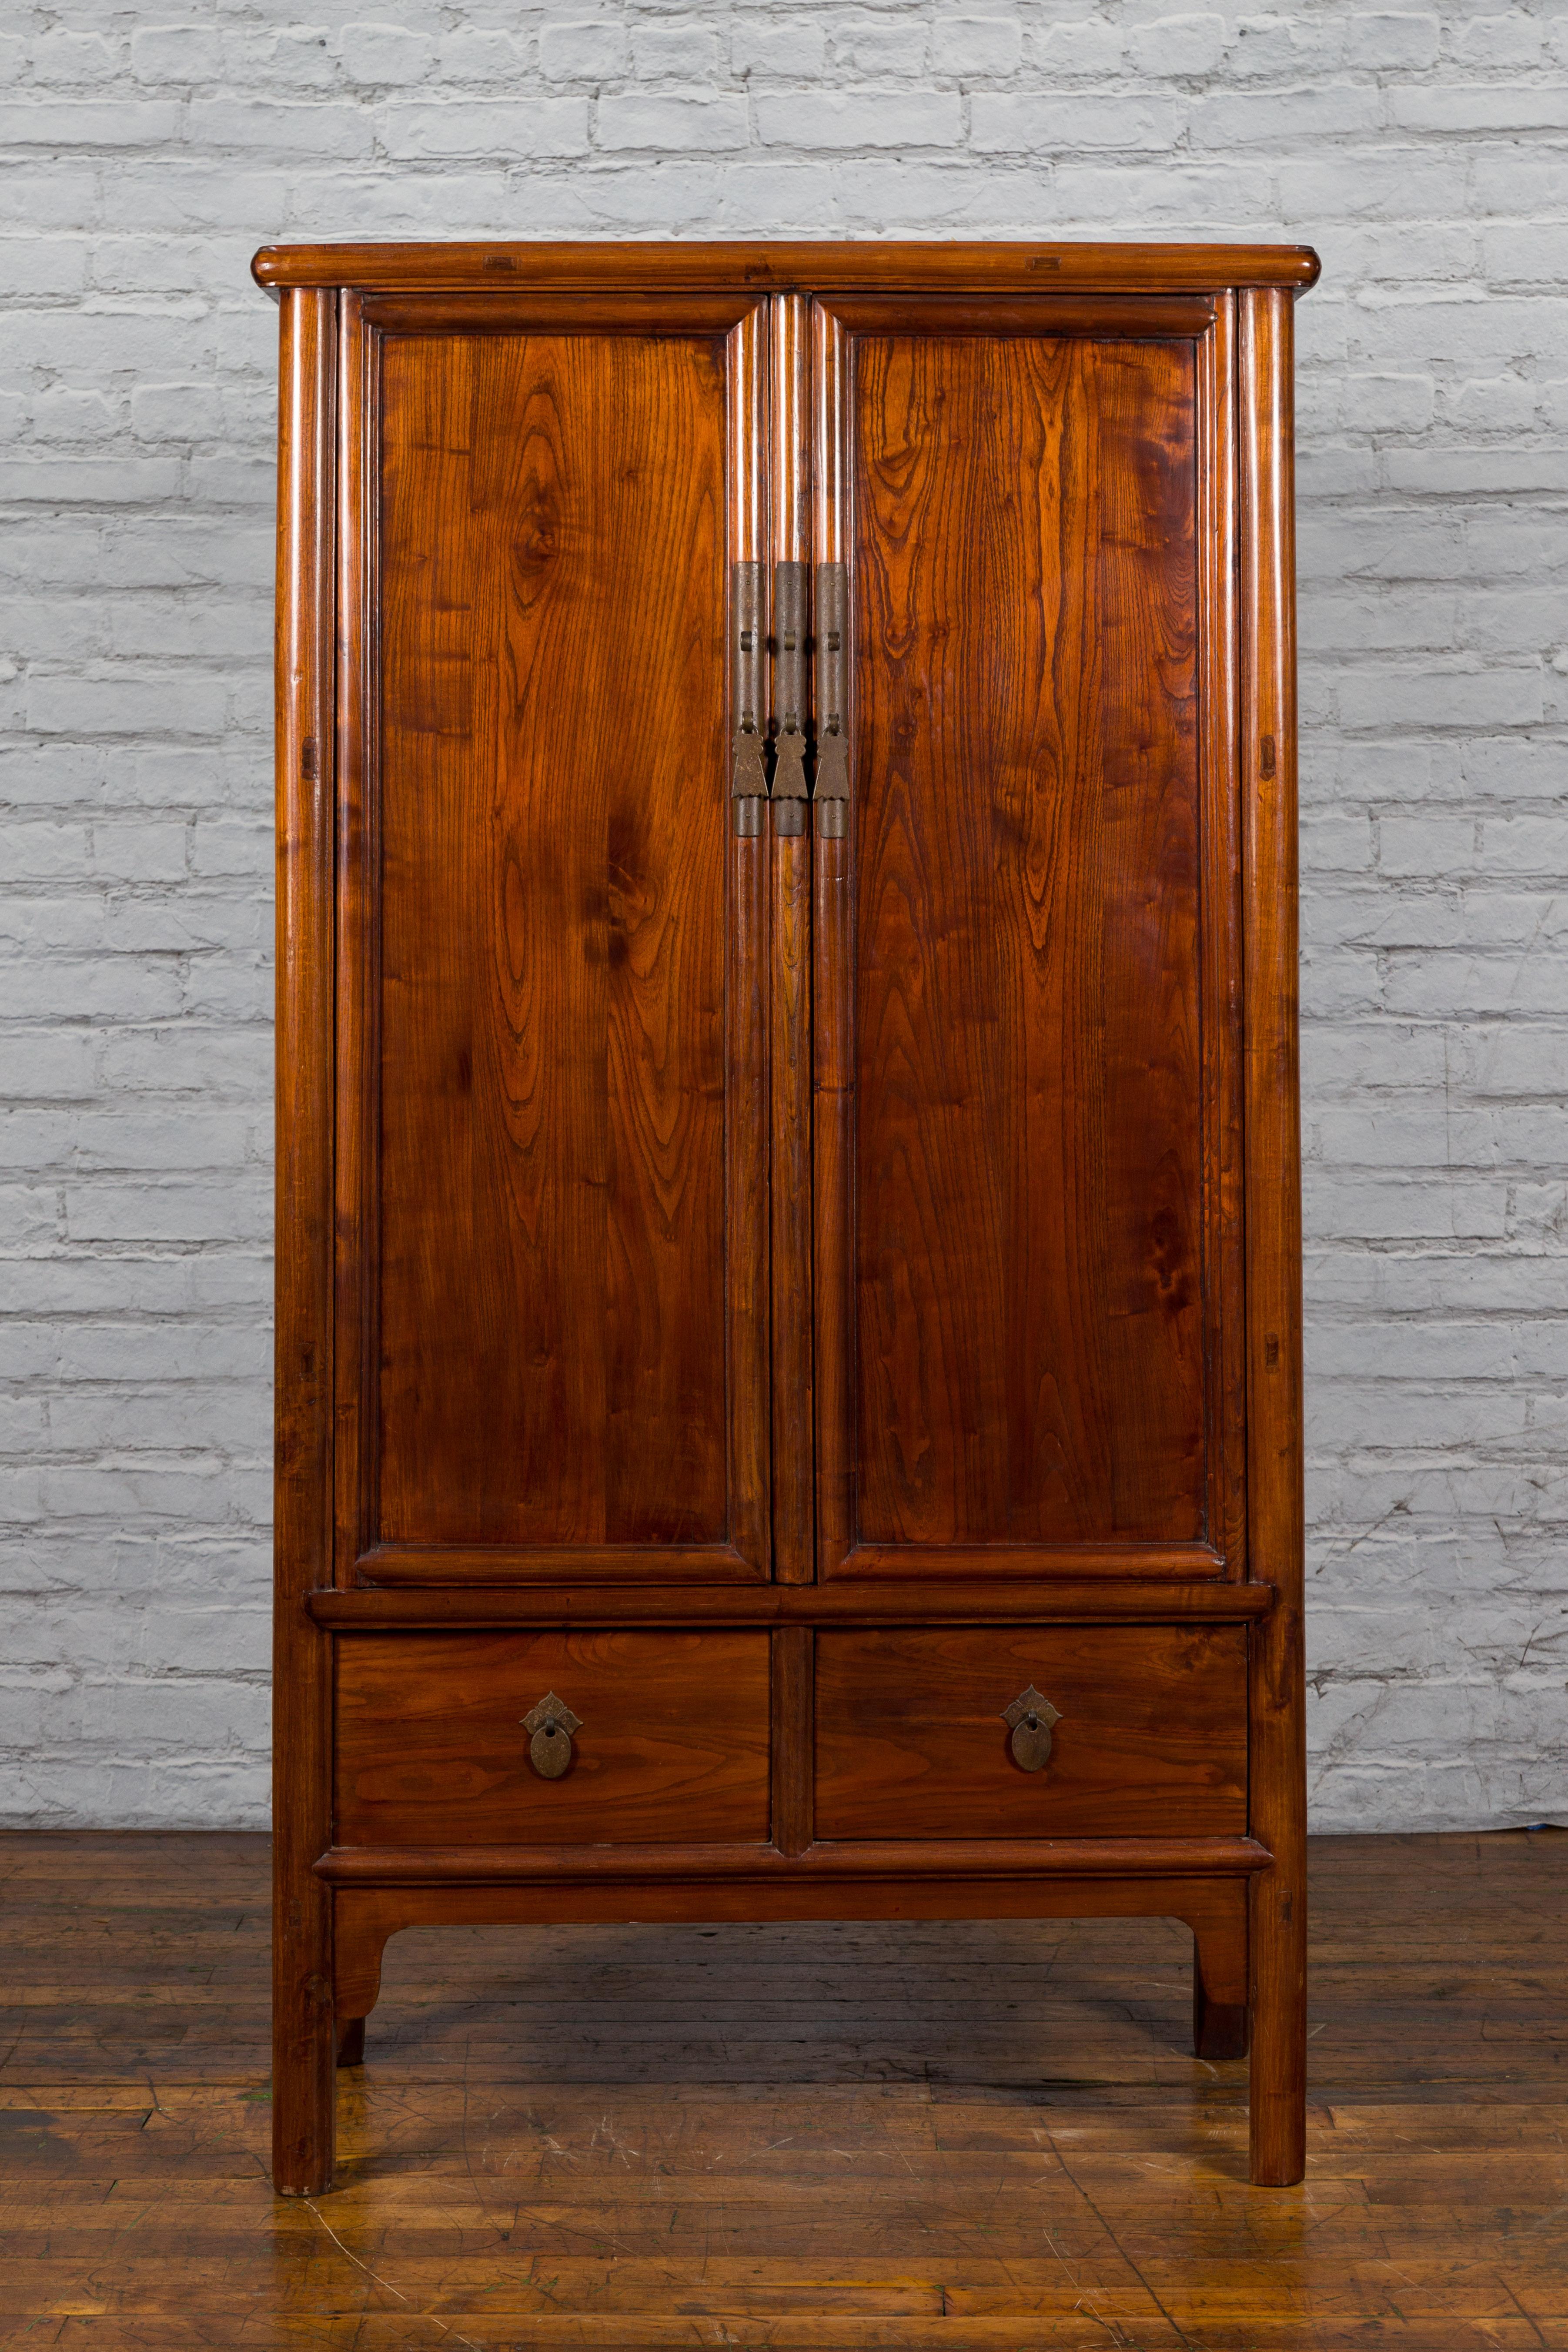 A Chinese Qing Dynasty period elmwood cabinet from the 19th century with tapered silhouette and two drawers. Created in China during the Qing Dynasty era, this elmwood noodle cabinet features a tapering silhouette perfectly complimented by a warm